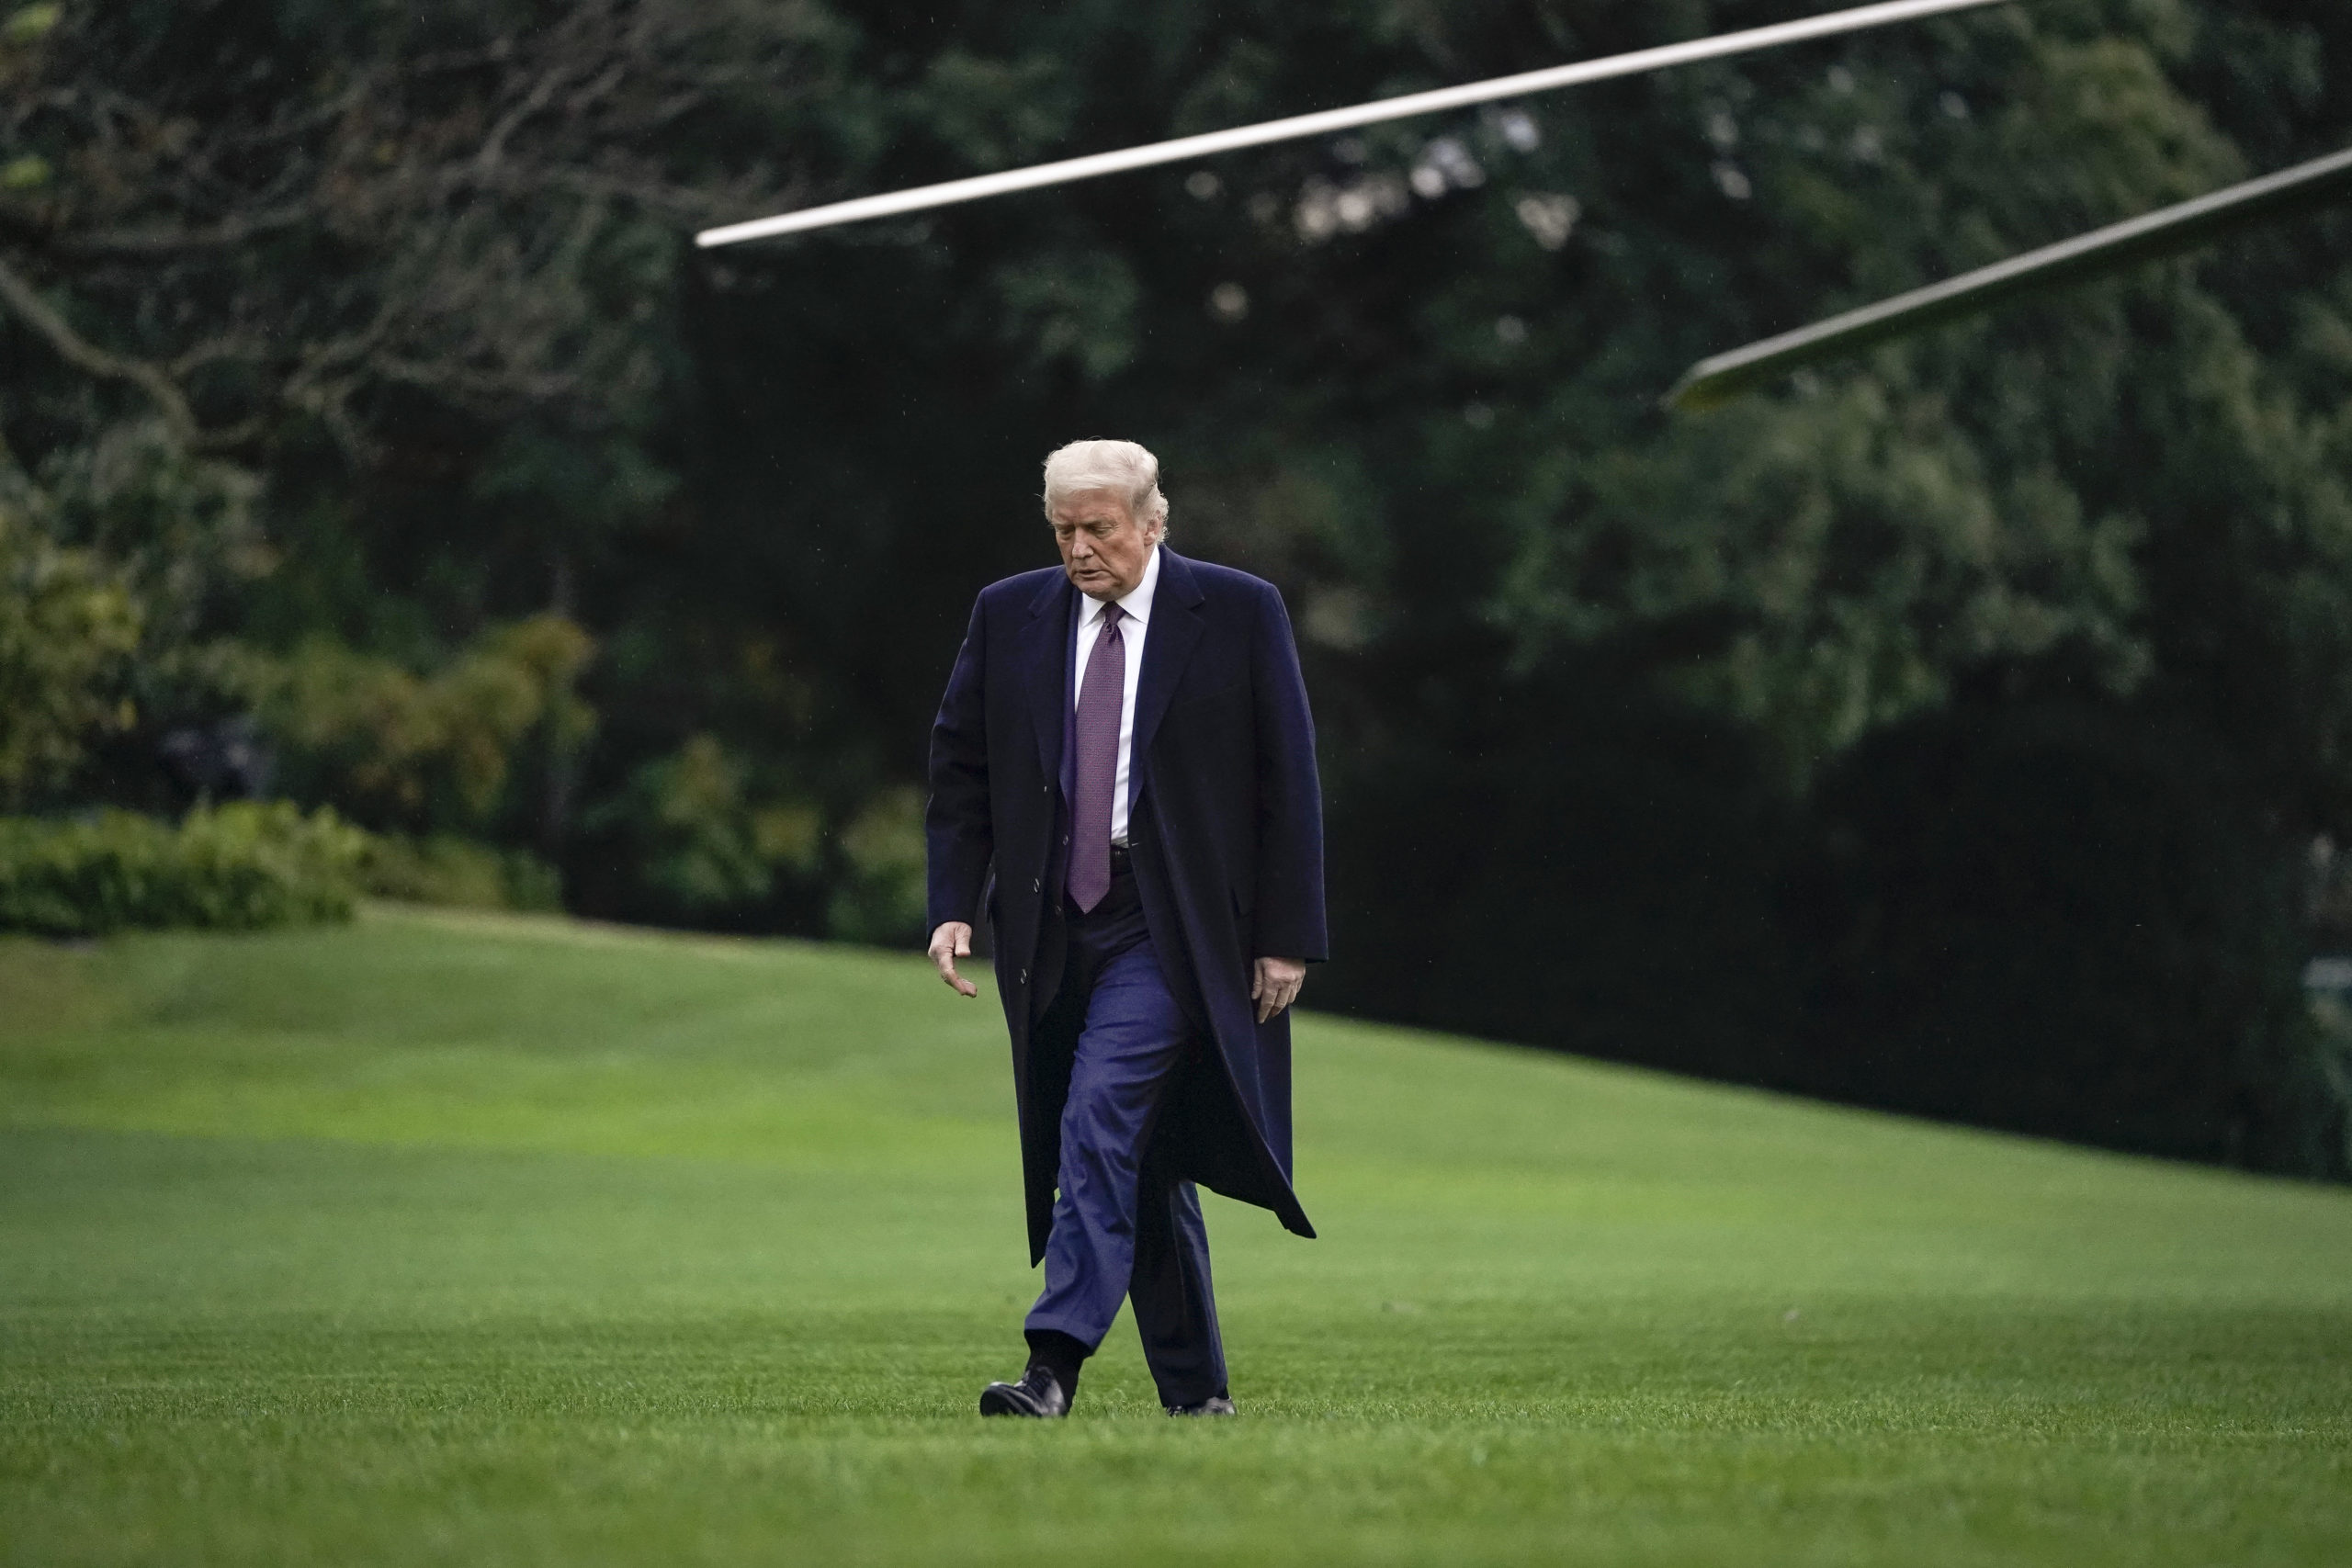 WASHINGTON, DC - OCTOBER 01: U.S. President Donald exits Marine One on the South Lawn of the White House on October 1, 2020 in Washington, DC. President Trump traveled to Bedminster, New Jersey for a roundtable event with supporters and a fundraising event. (Photo by Drew Angerer/Getty Images)